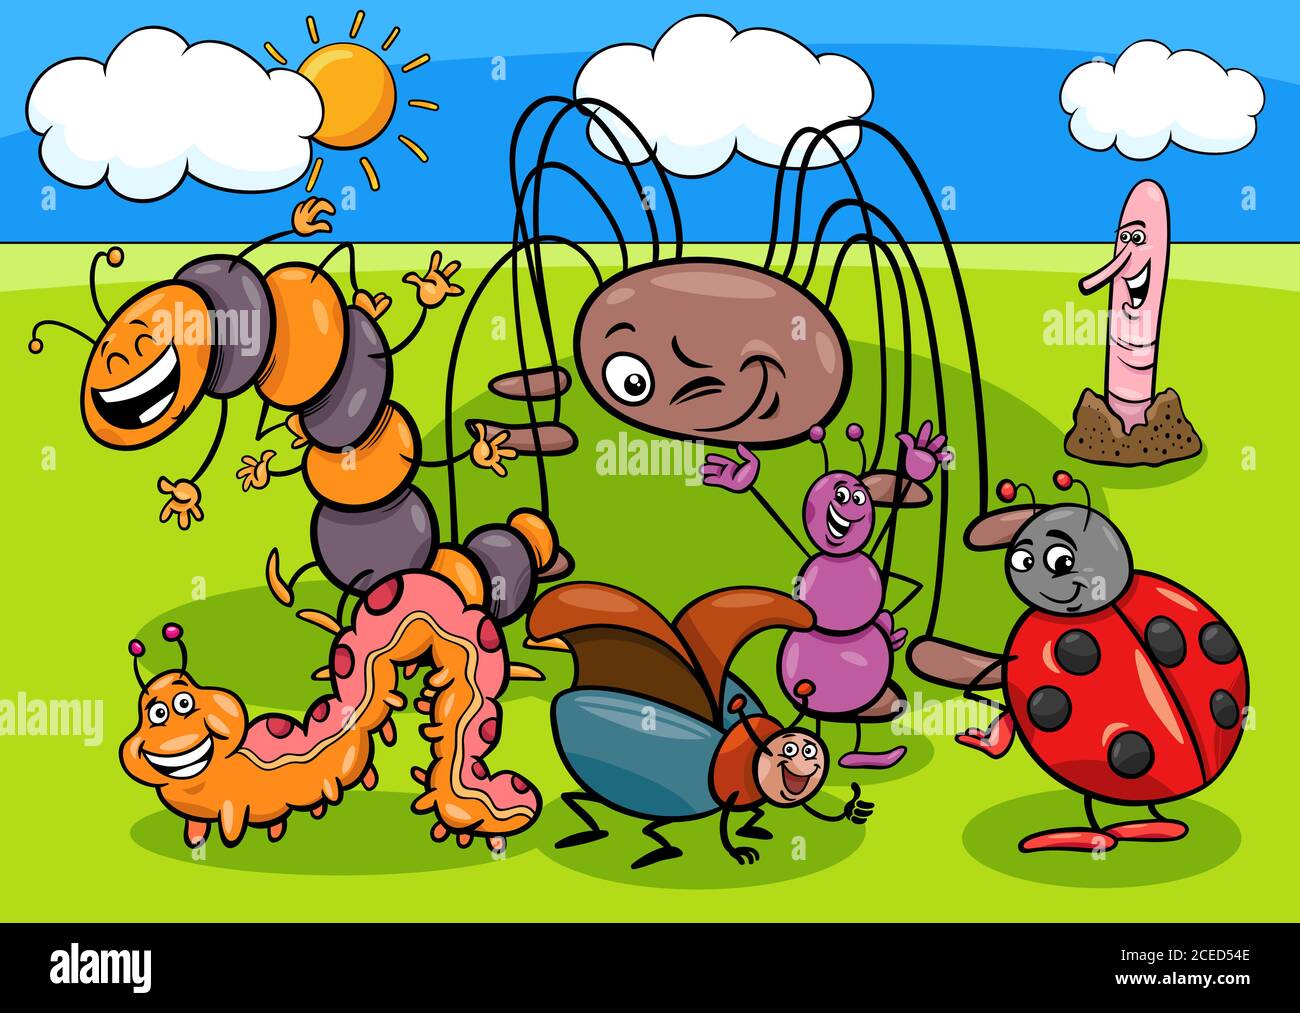 Cartoon Illustration of Insects and Bugs Animal Characters Group Stock Vector